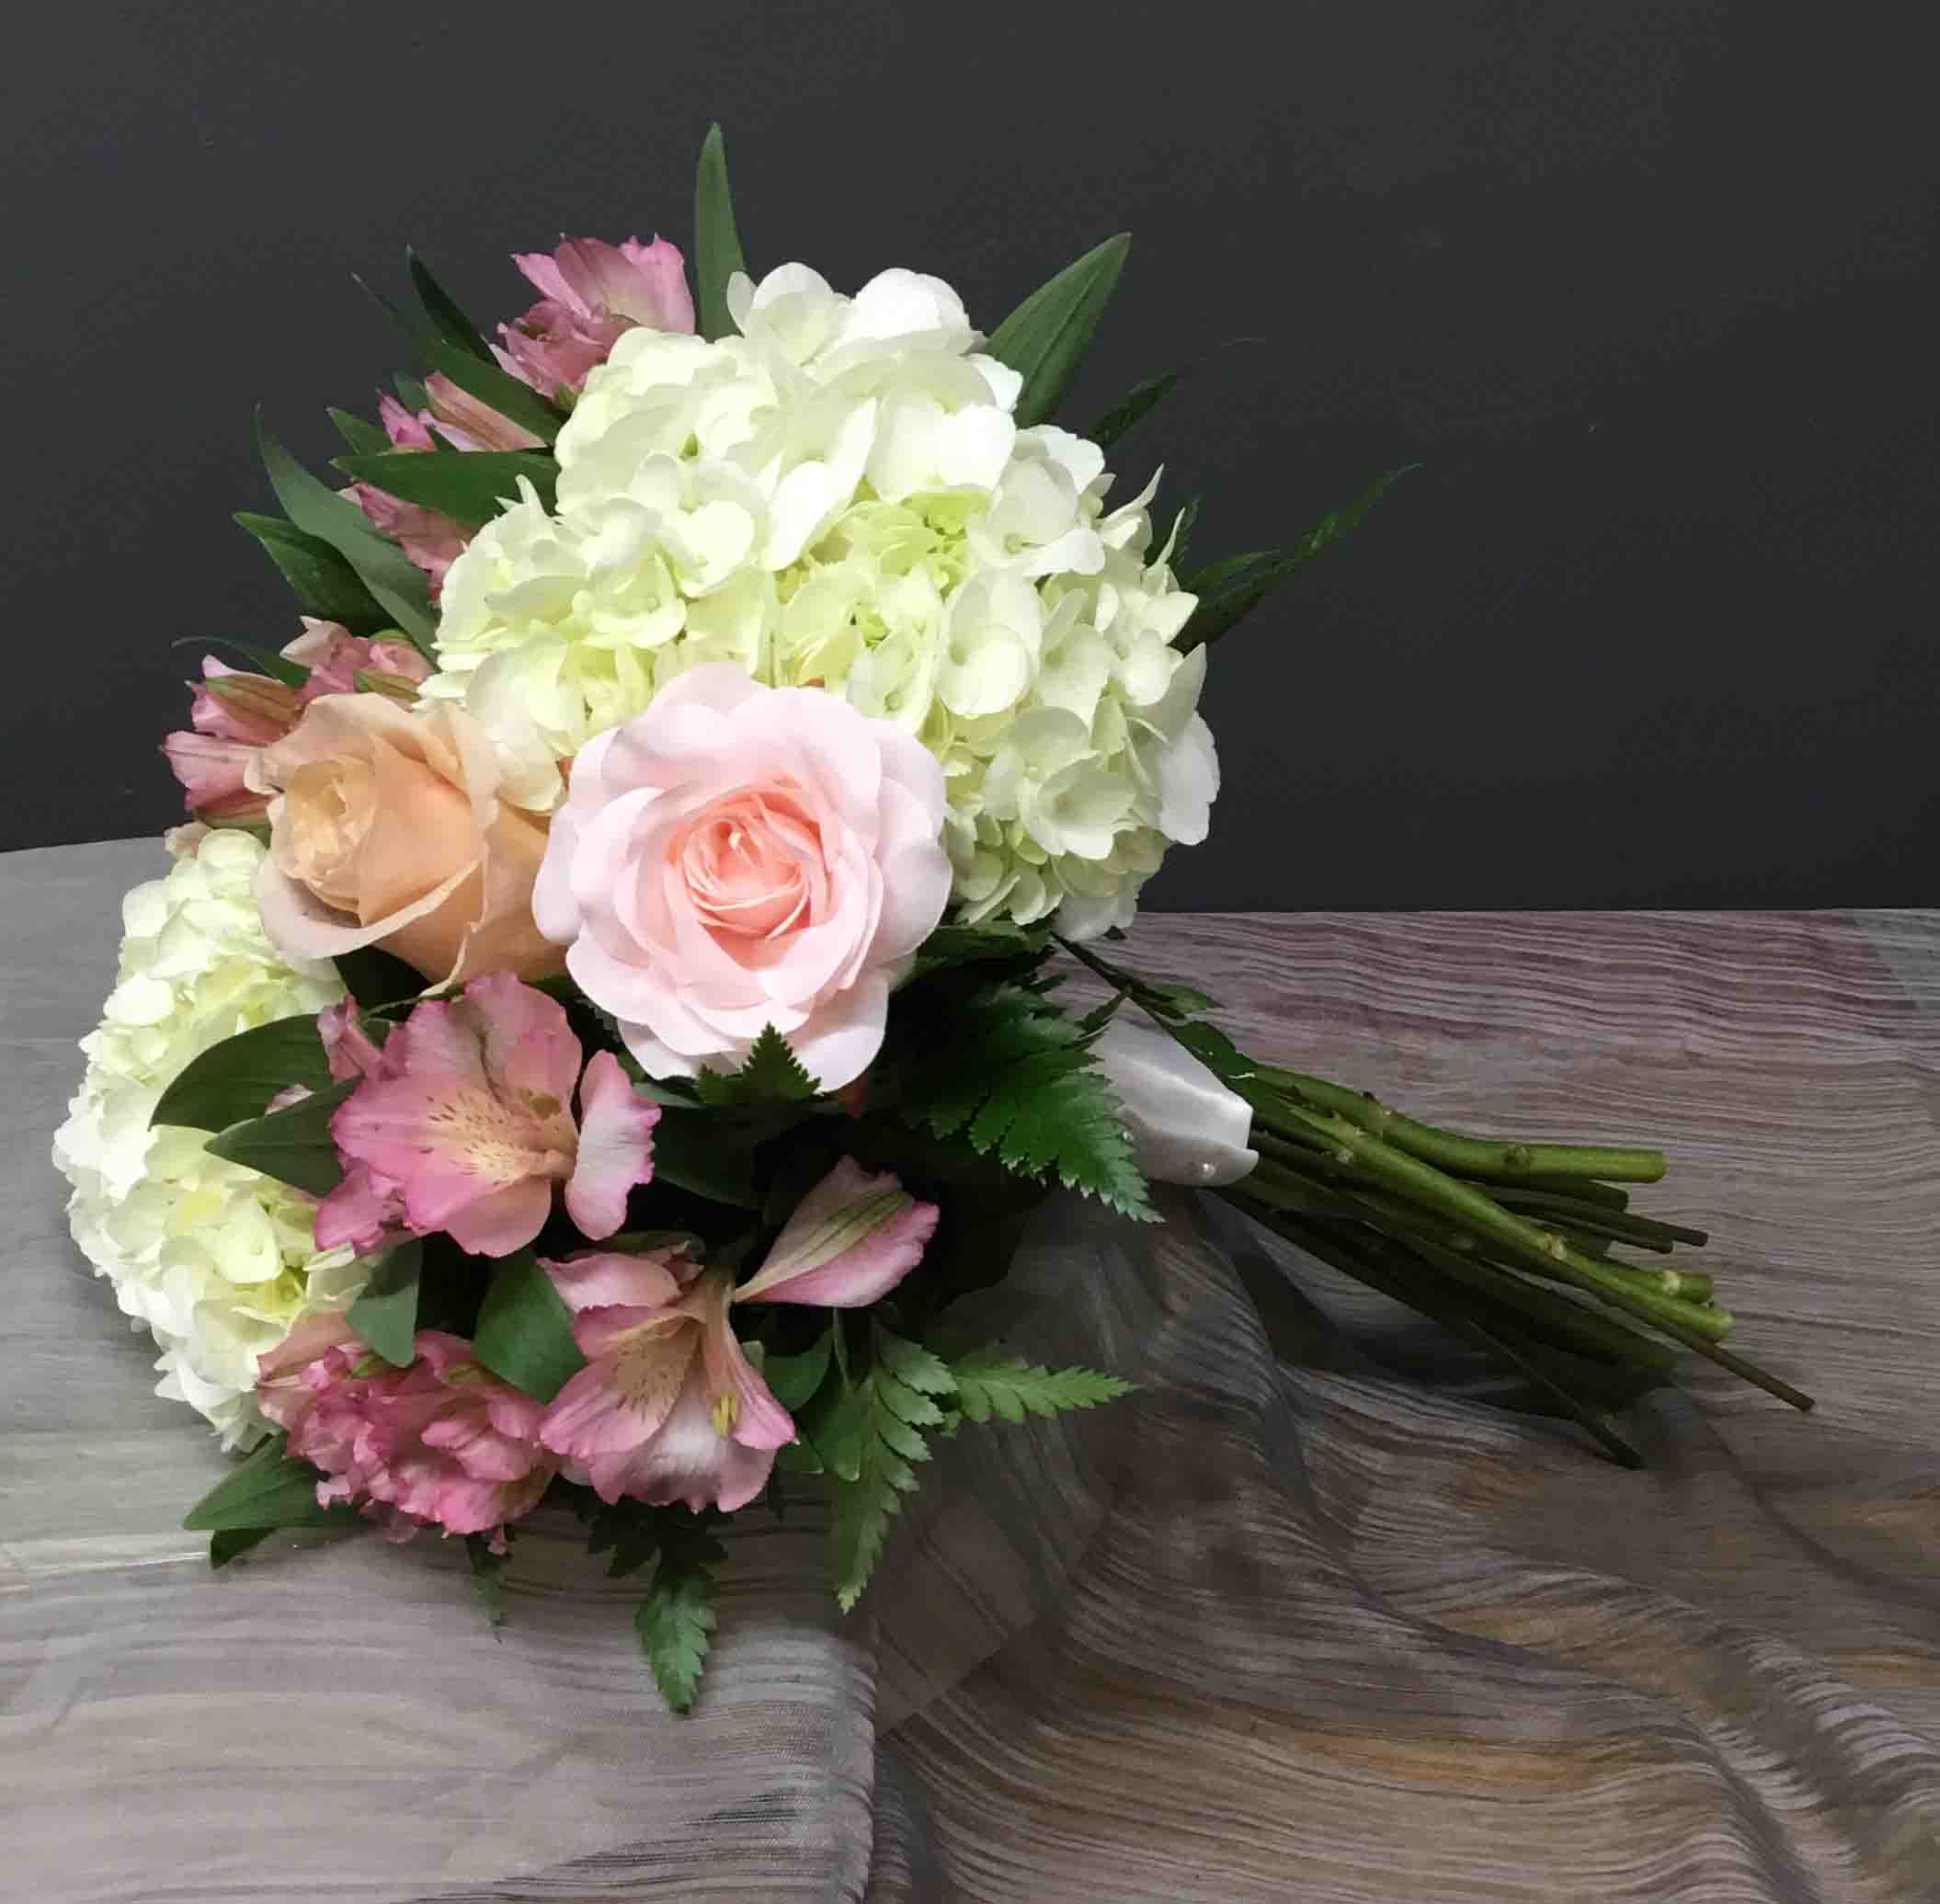 Dance Bouquet - Handheld and Wrapped Bouquet, Hydrangeas, Roses, Alstromeria. Call 816-858-2457 to customize